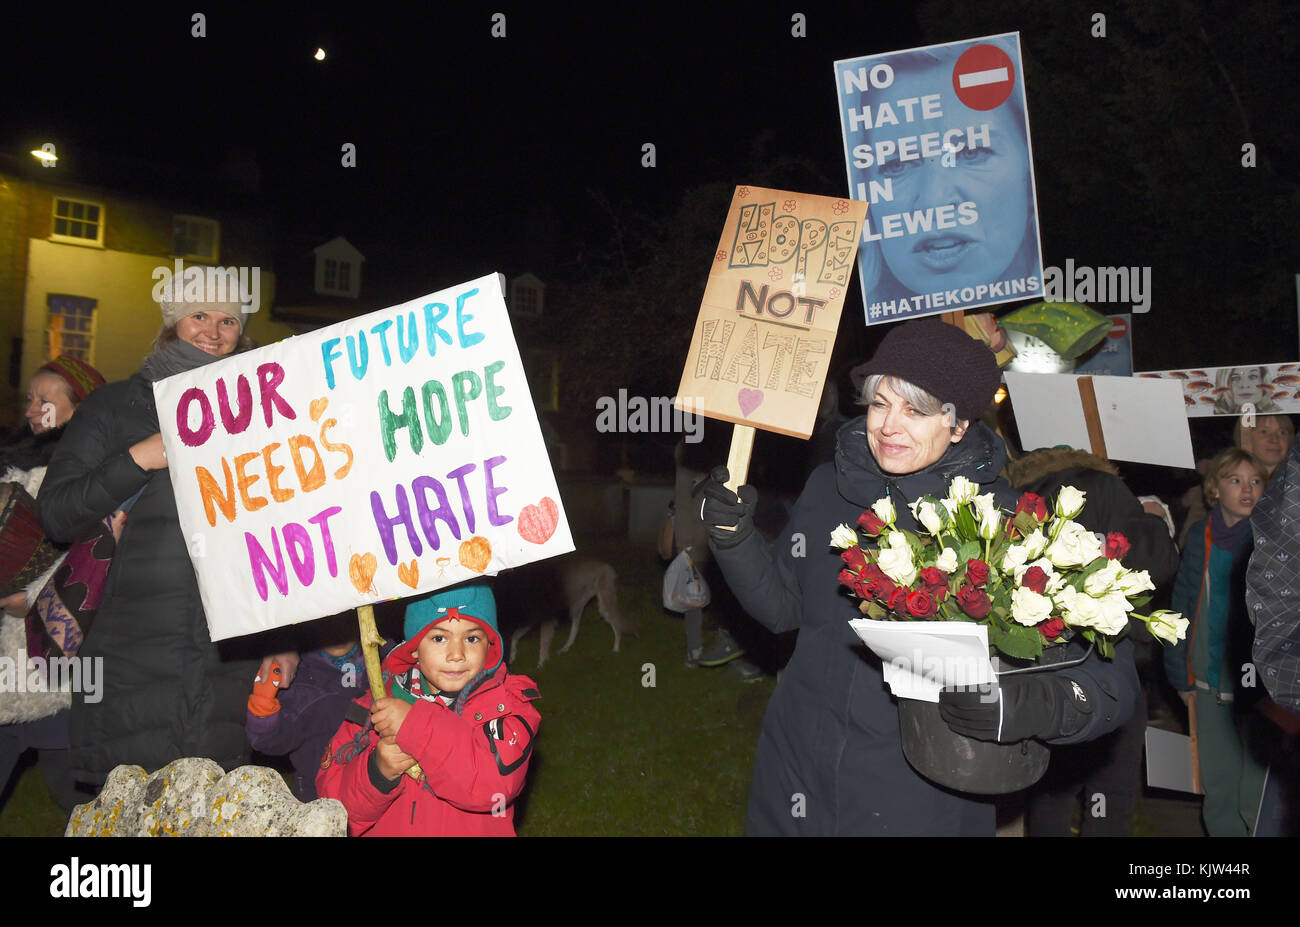 Lewes UK 25th 2017 - Protesters outside the All Saints Centre in Lewes tonight where Katie Hopkins was due to speak at the Lewes Speakers Festival  Photograph taken by Simon Dack Stock Photo